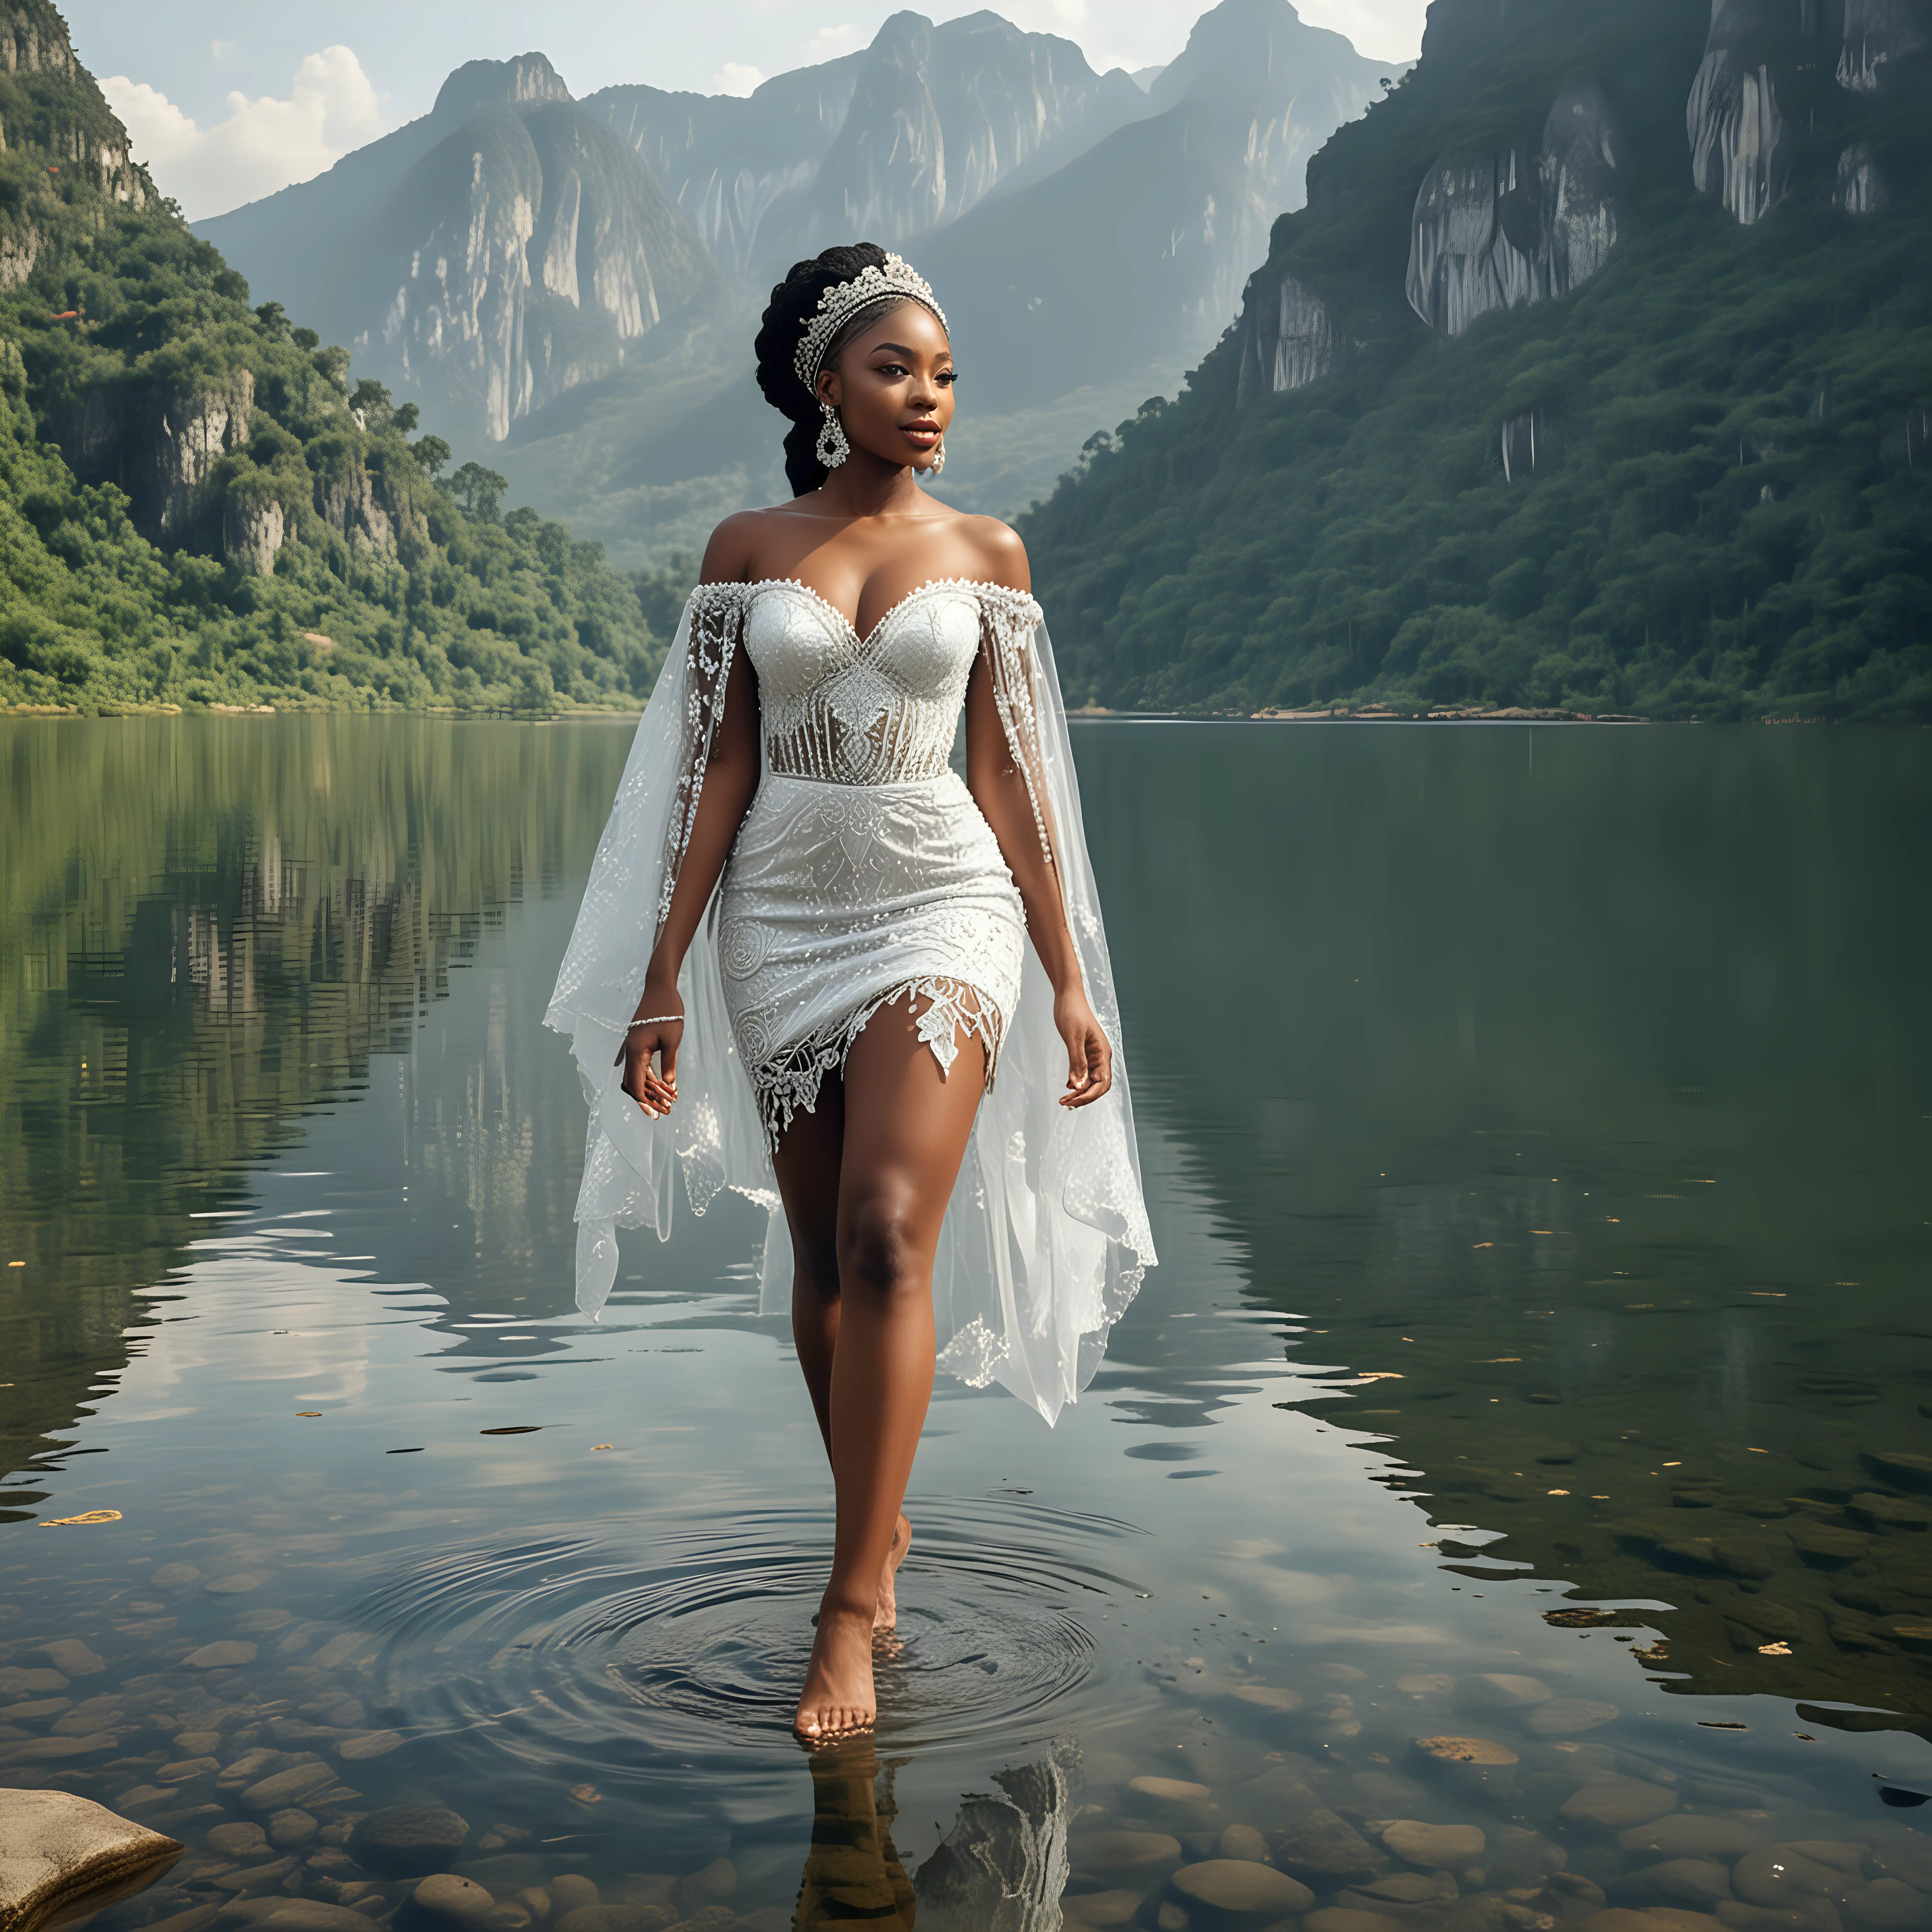 Nigerian Beauty Pageant Crystal Lake Serenity Amidst Mountain Majesty